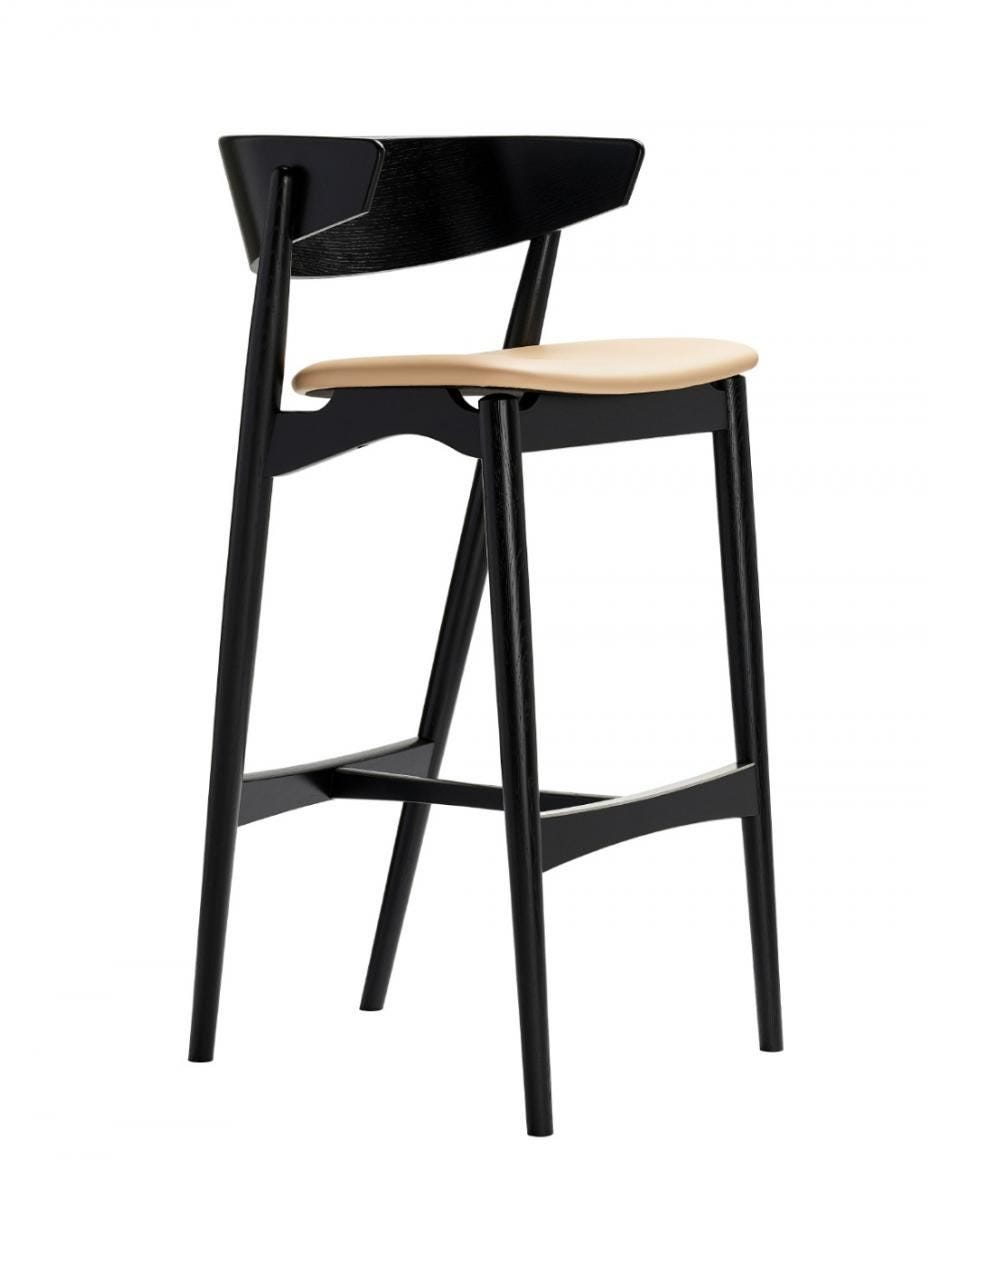 Sibast No 7 Stool With Back Rest Black Oak Honey Leather Kitchen Counter Stool 65cm Designer Furniture From Holloways Of Ludlow